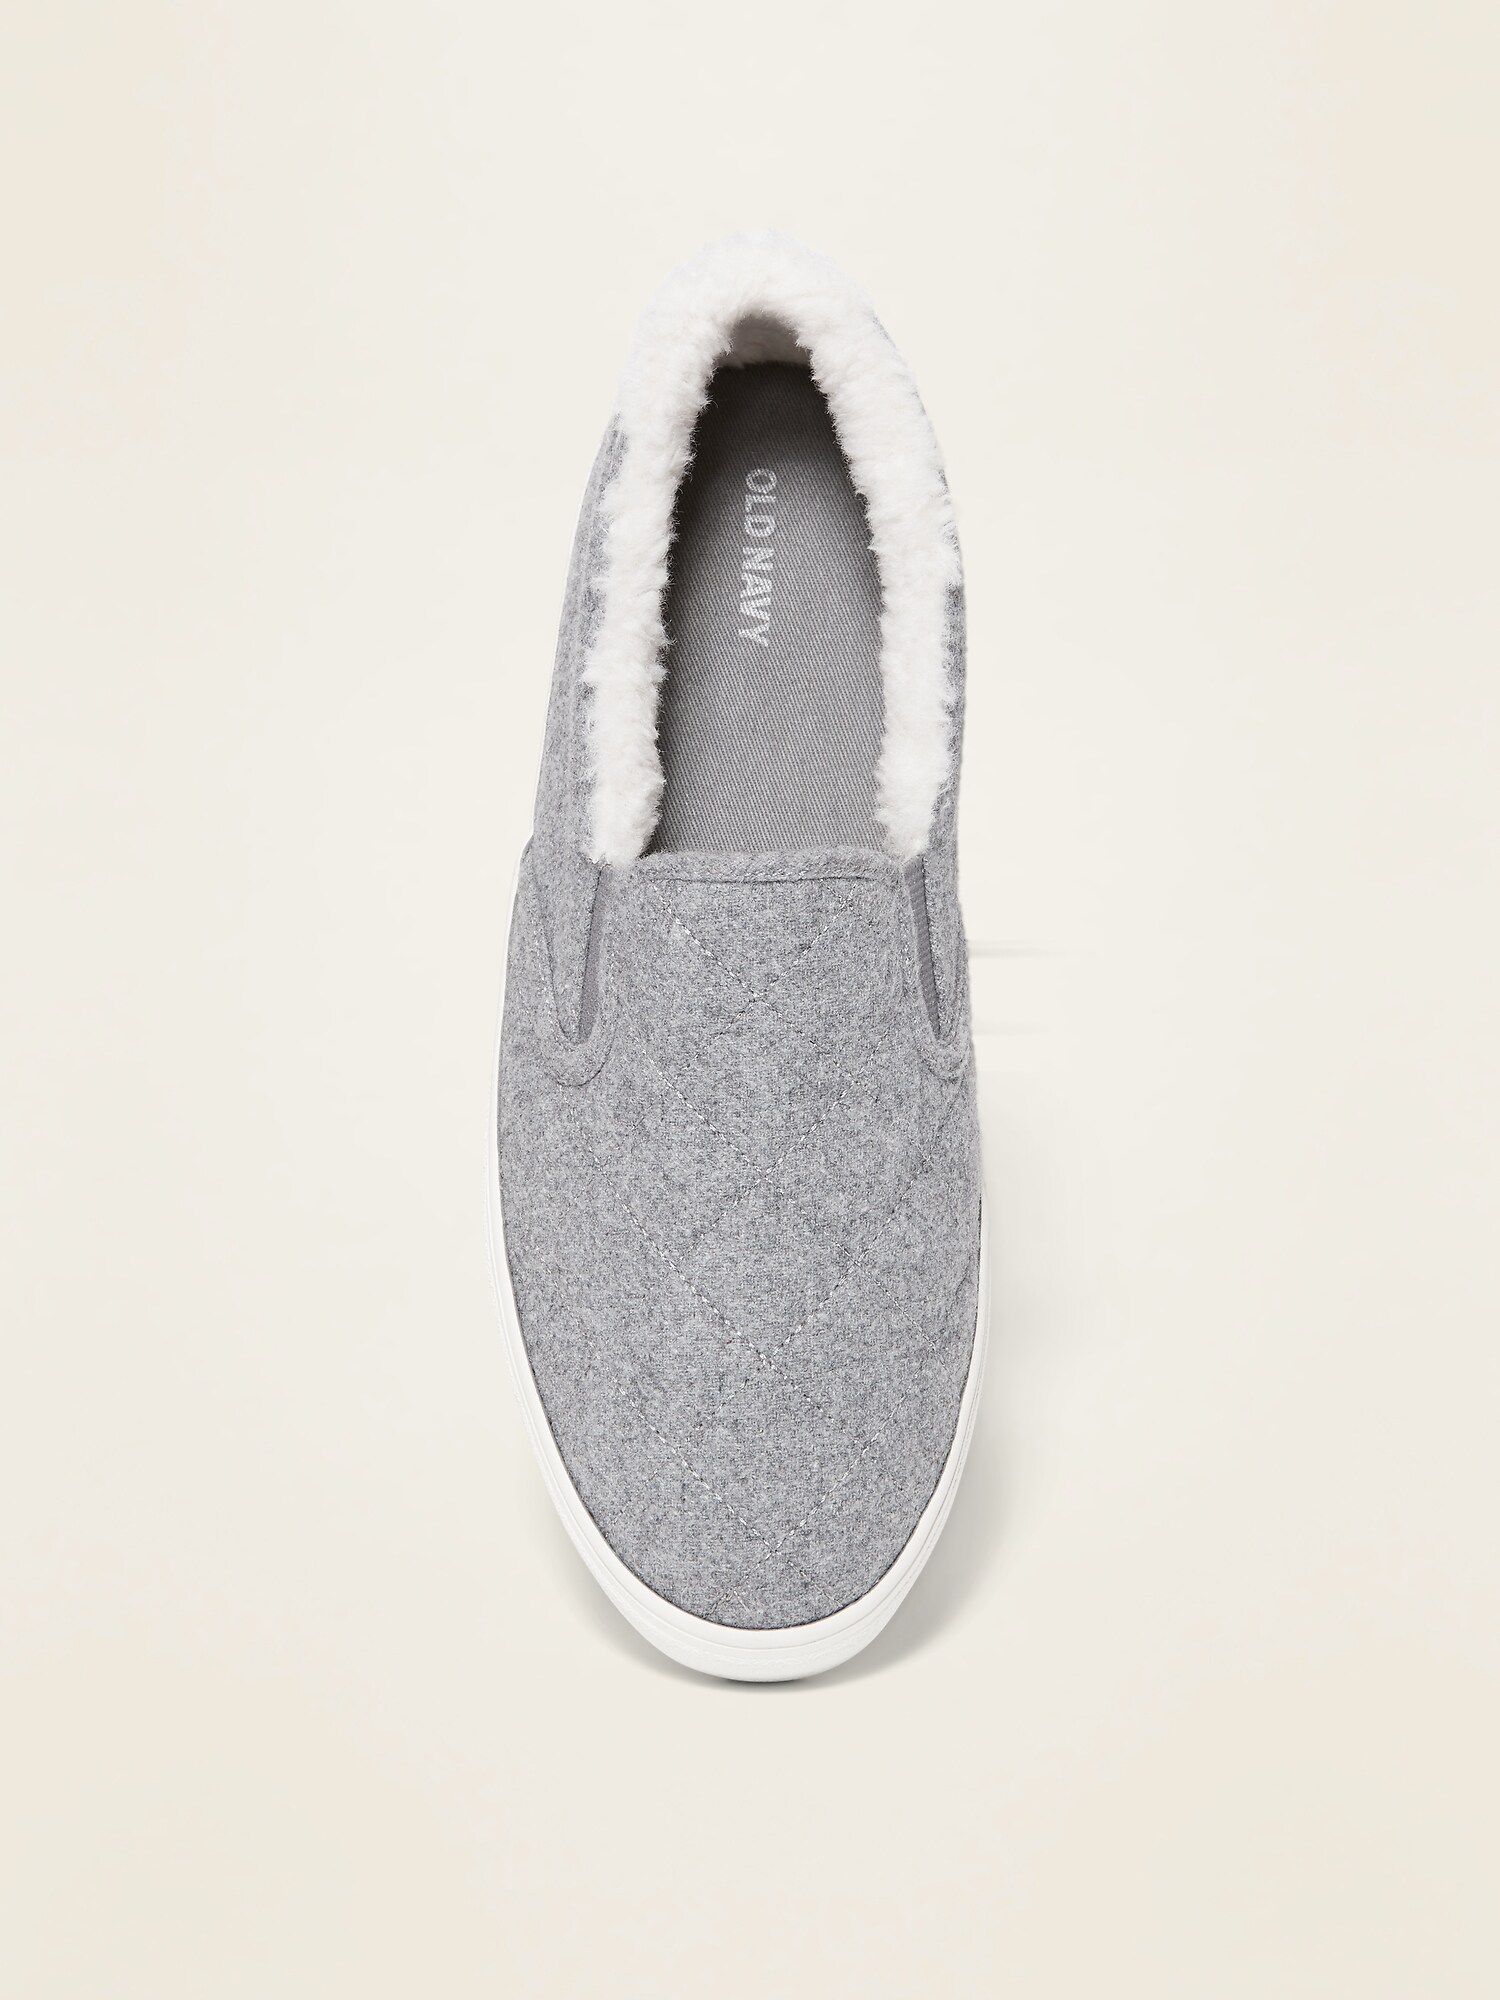 Sherpa-Lined Slip-Ons for Women | Old Navy